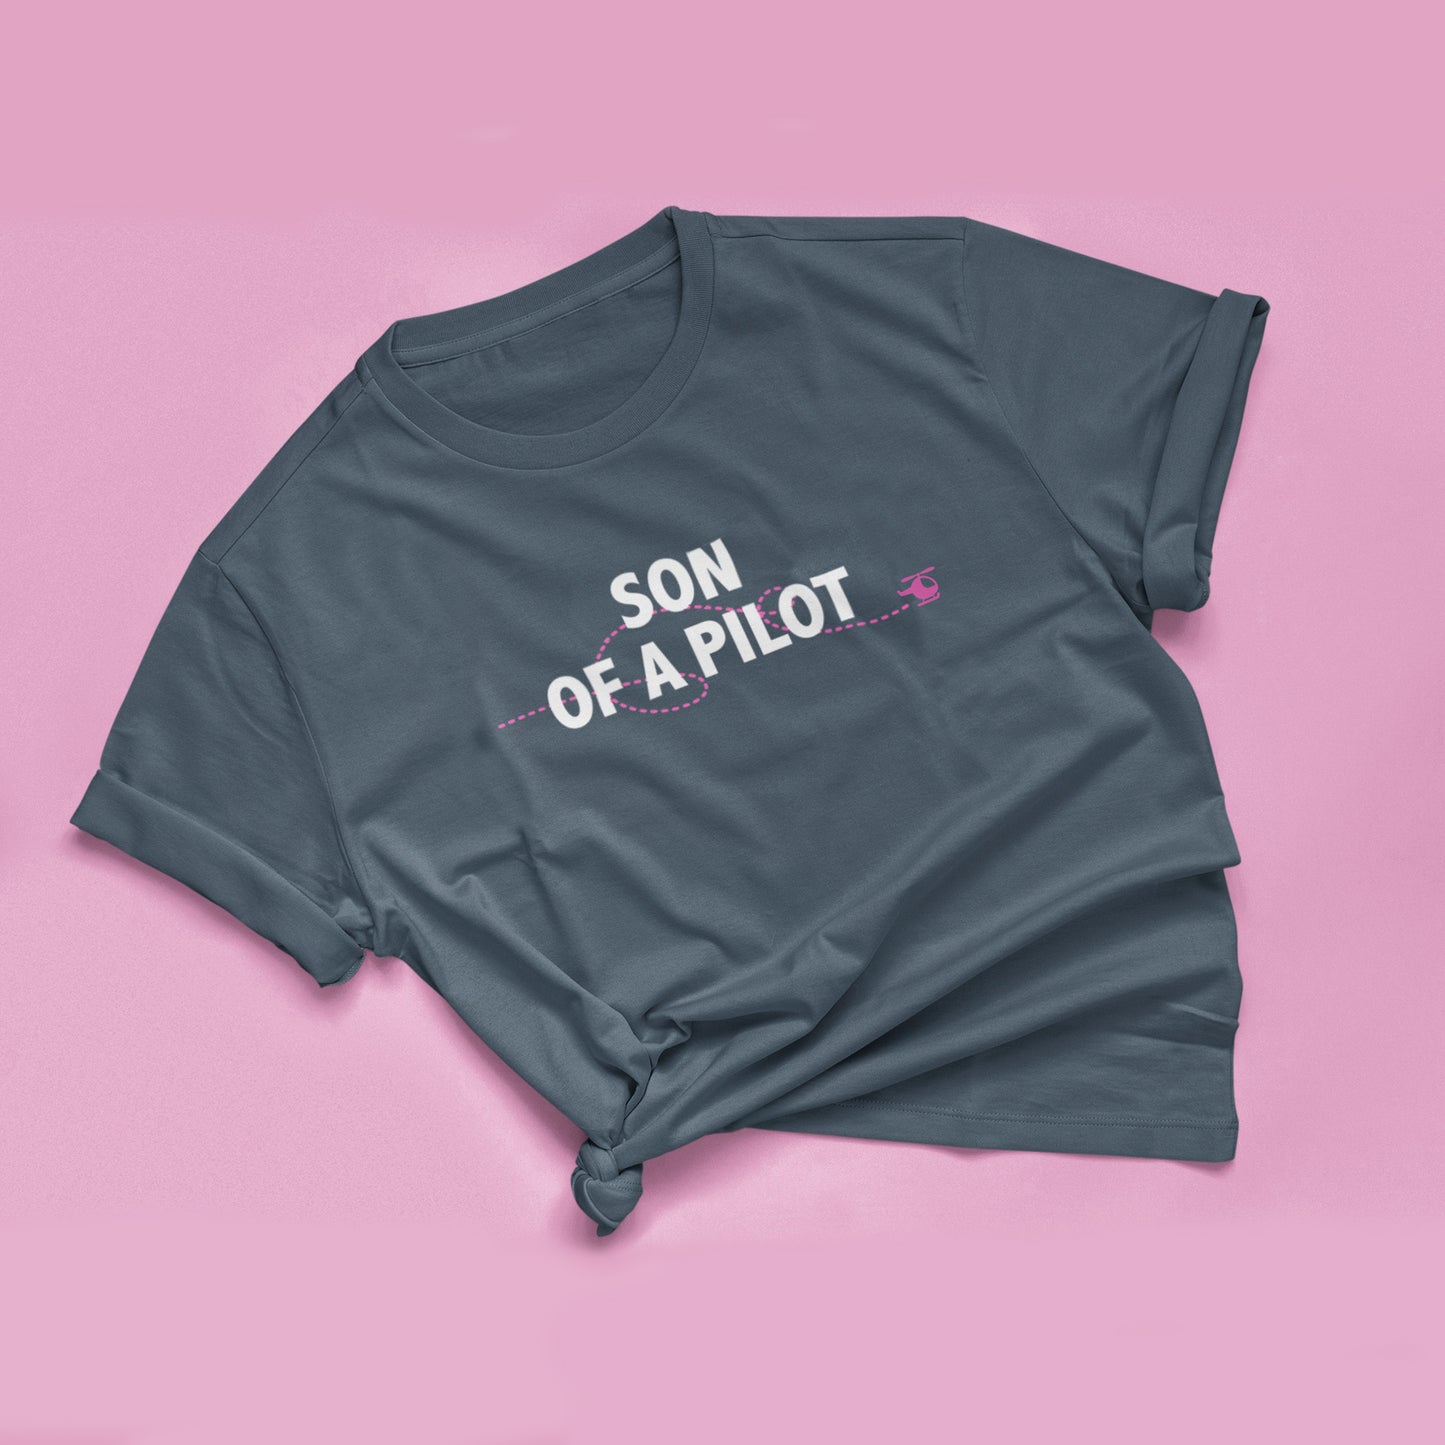 Son of the/a Pilot - Baby & Toddler T-shirts